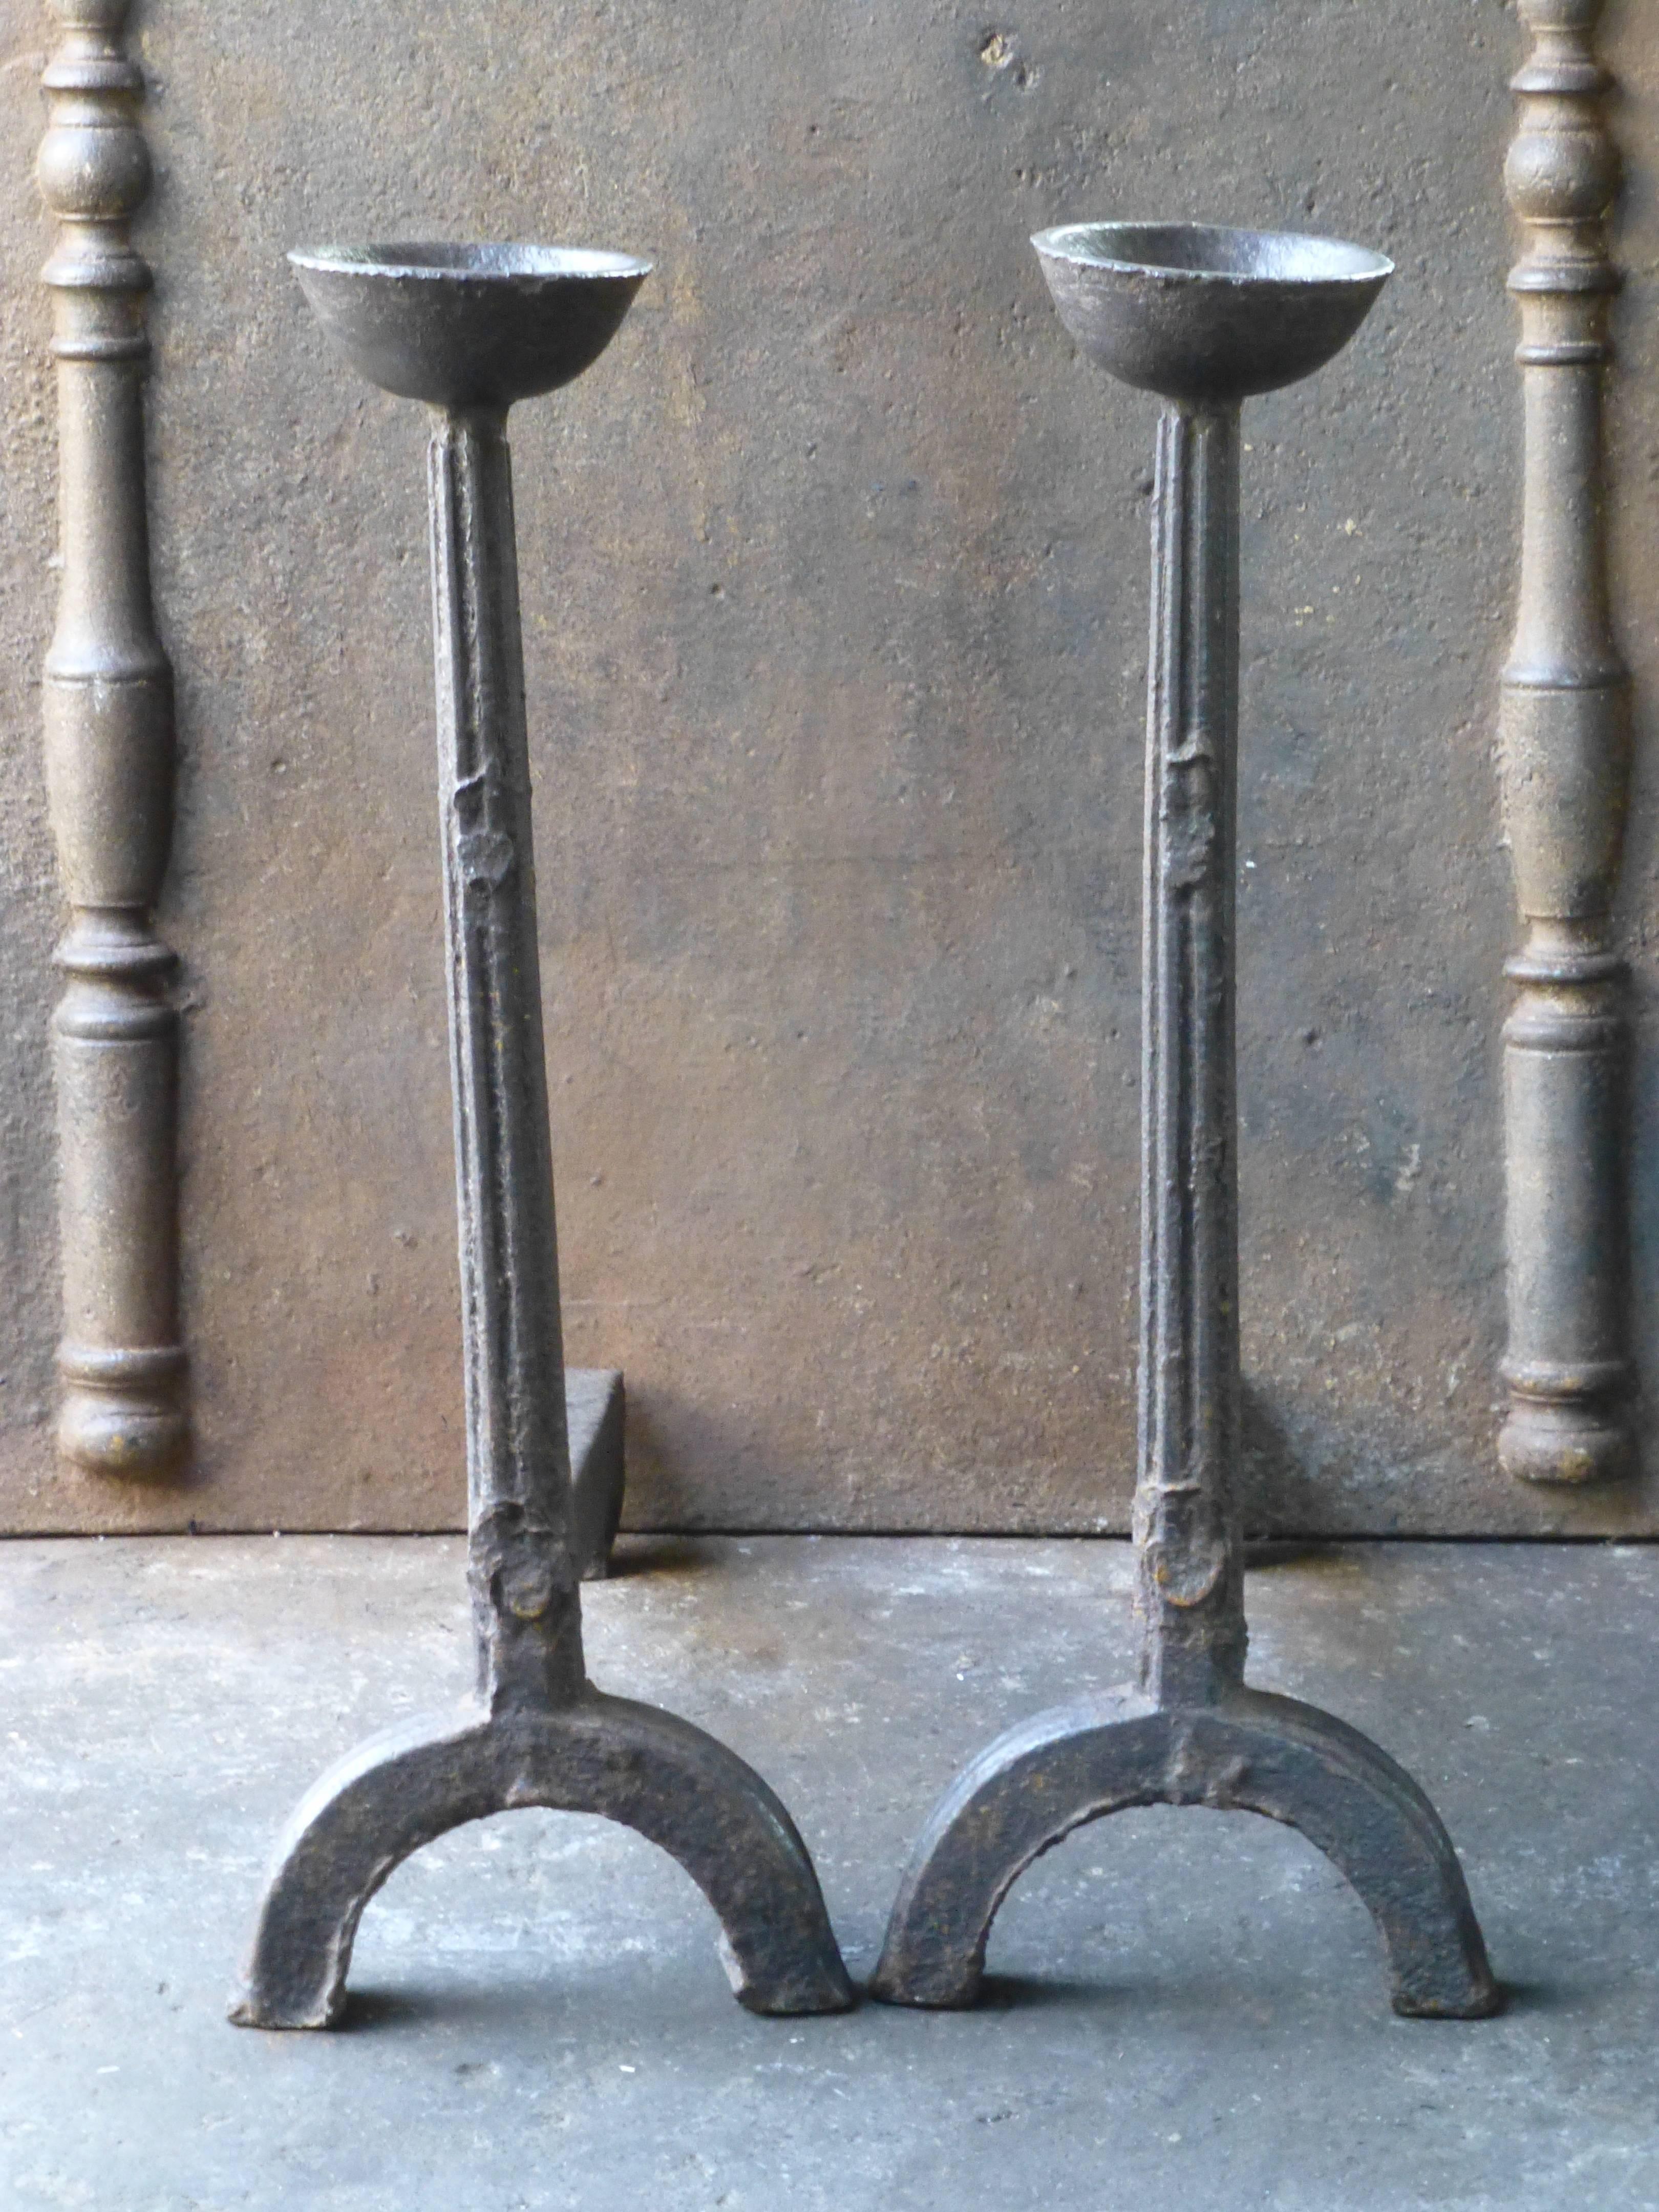 17th century andirons made of cast iron. These French andirons are called 'landiers' in France. This dates from the times the andirons were the main cooking equipment in the house. They had spit hooks to grill meat or poultry and sometimes a cup to